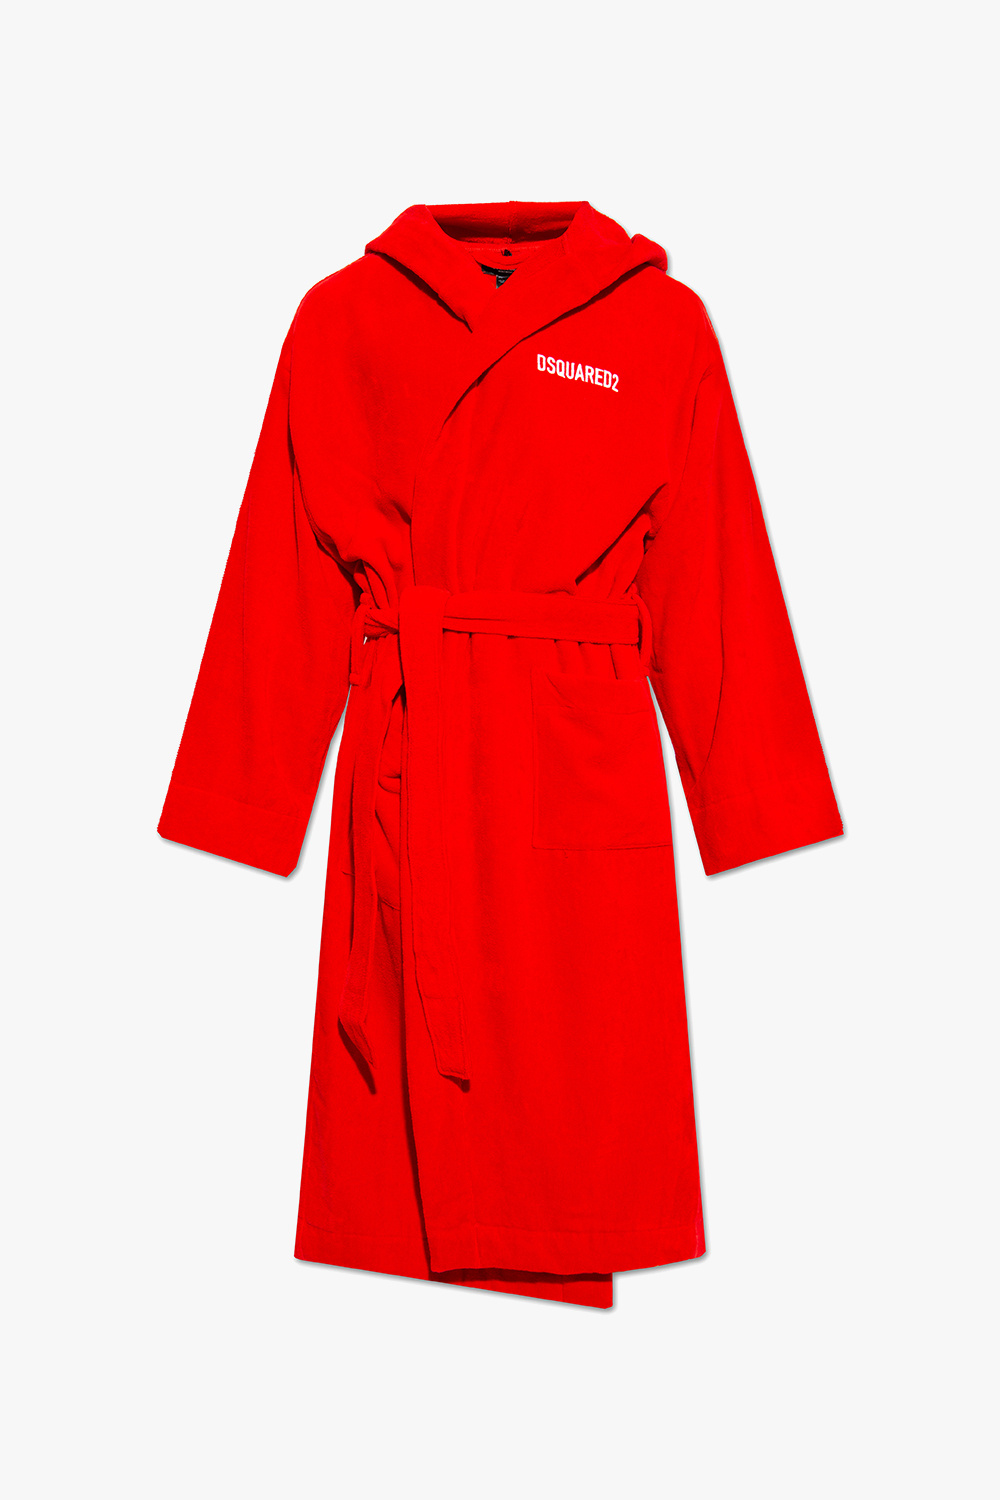 Dsquared2 Robe with logo, Men's Clothing